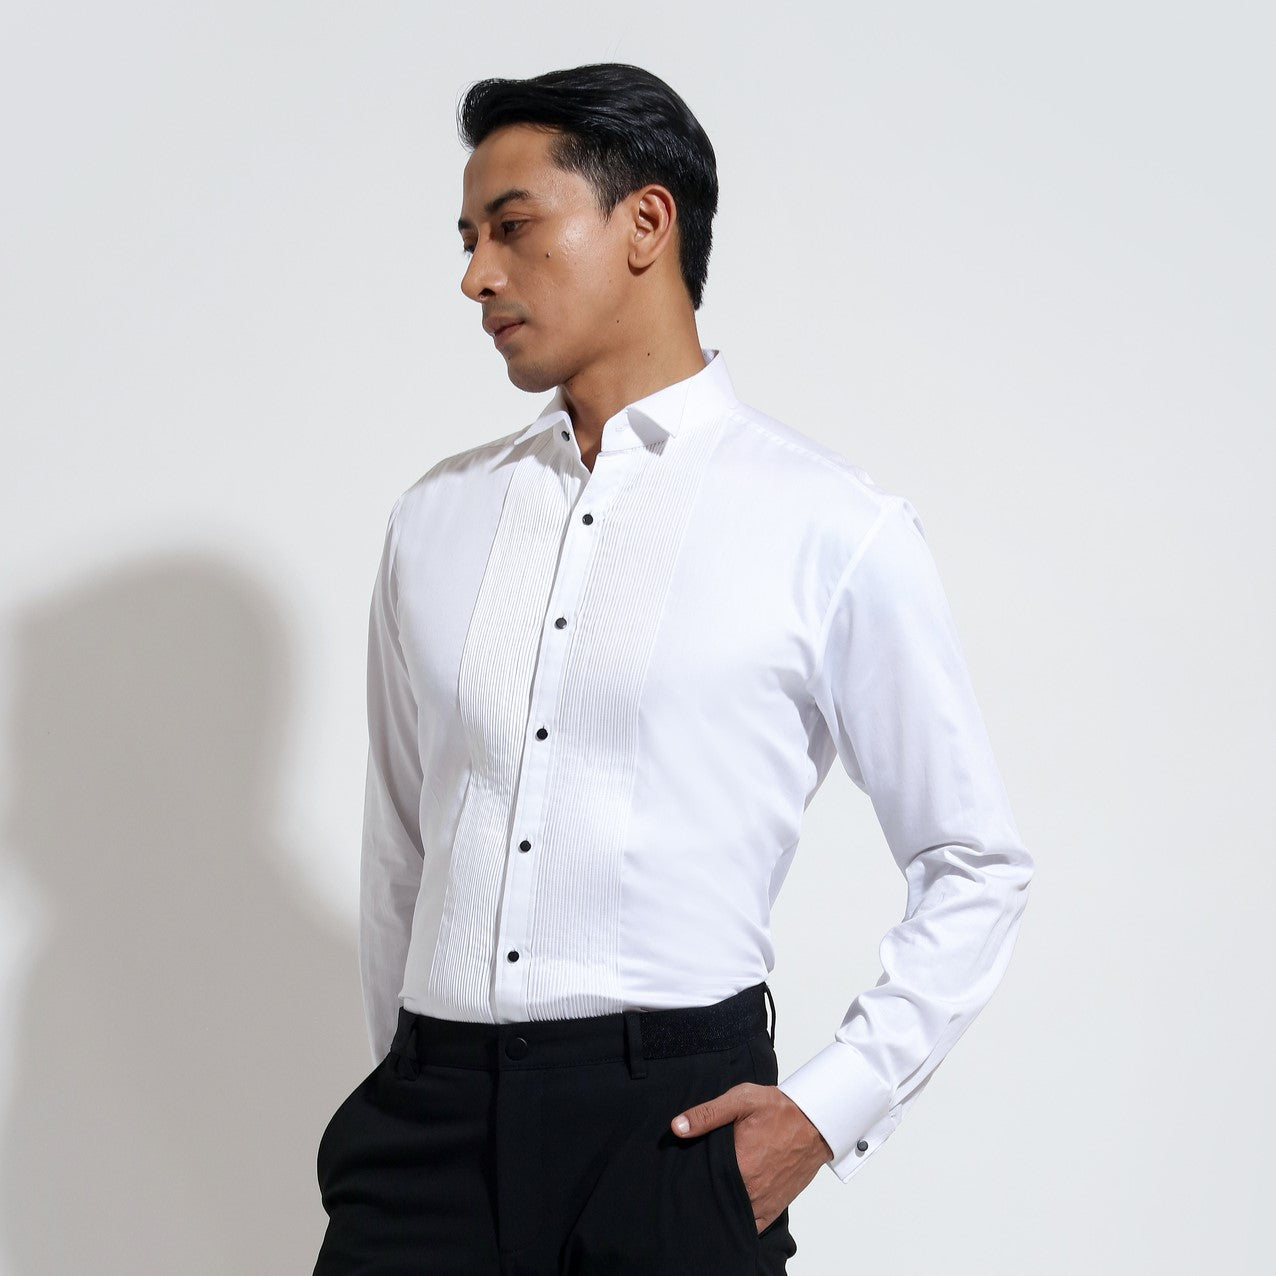 Long sleeve wing collar shirt with cufflink and contrast buttons